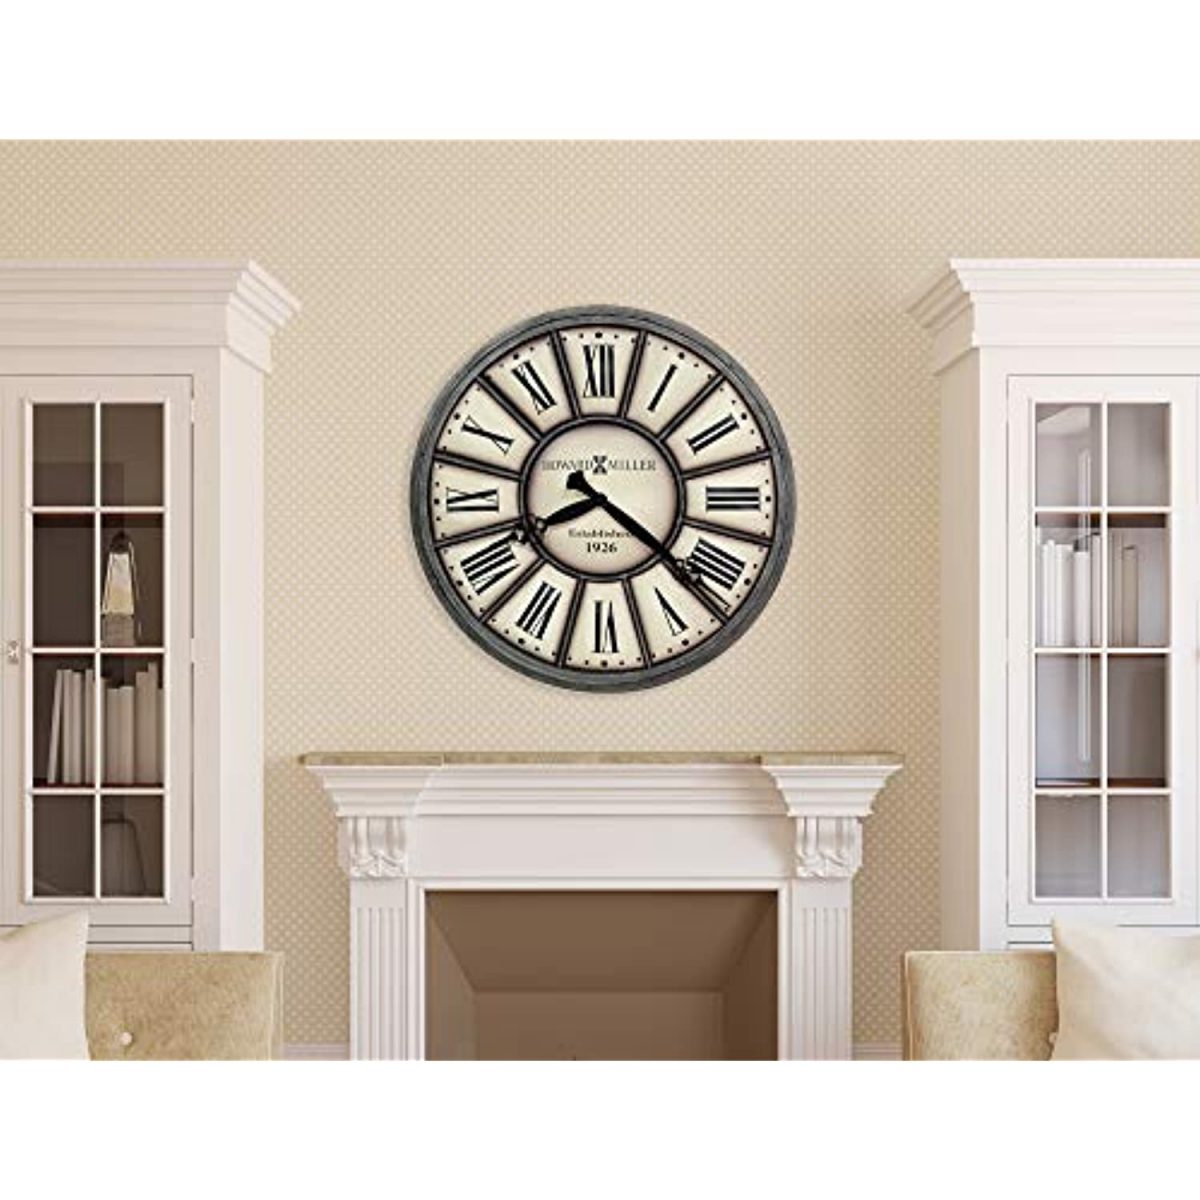 Gallery Wall Clocks Archives - Creative Clock - Shop online for Digital